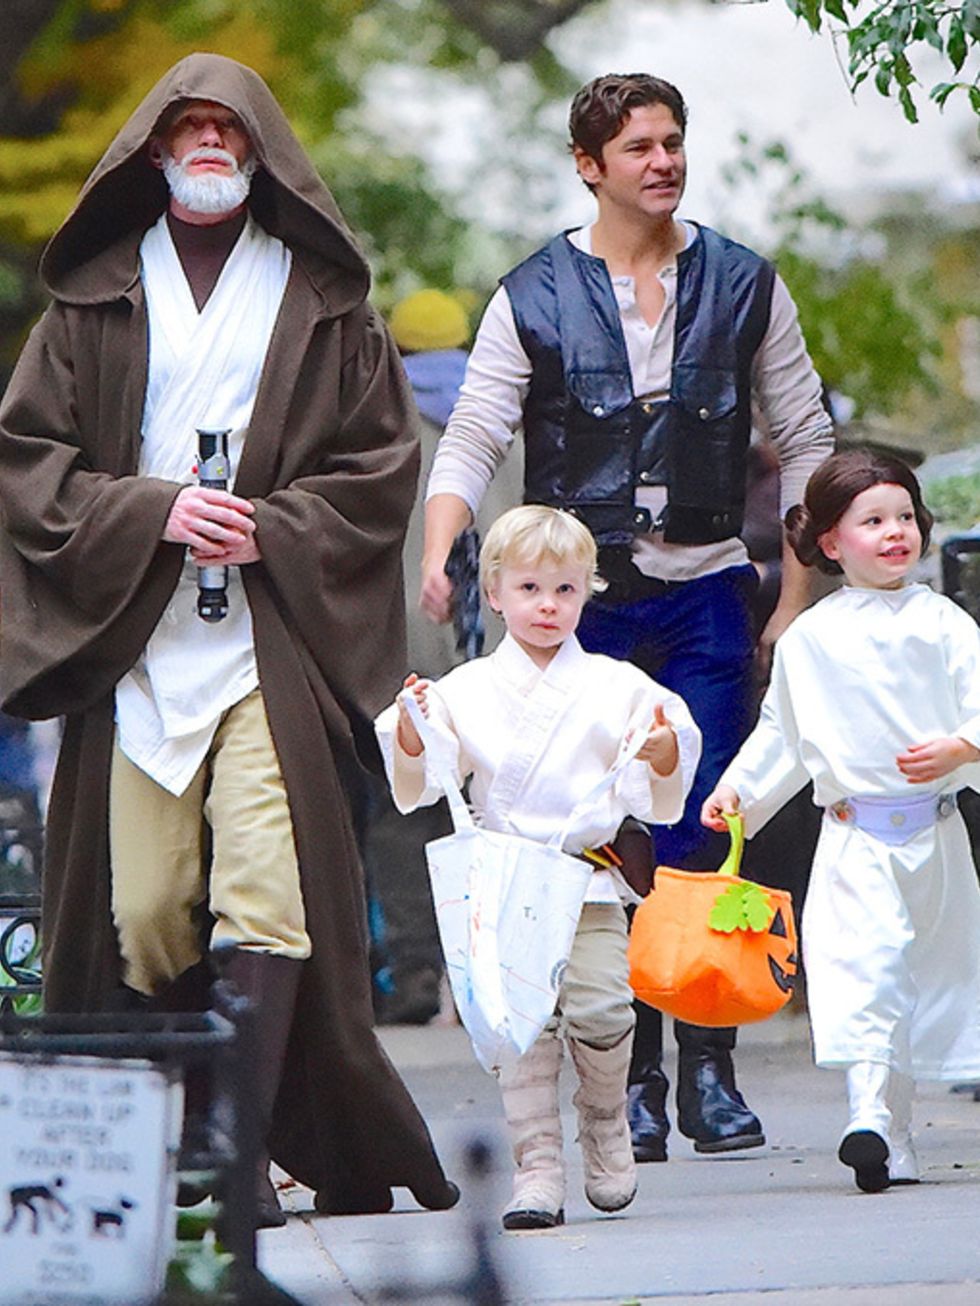 Footwear, Leg, People, Costume design, Costume, Cloak, Acting, Mantle, Overall, Family, 